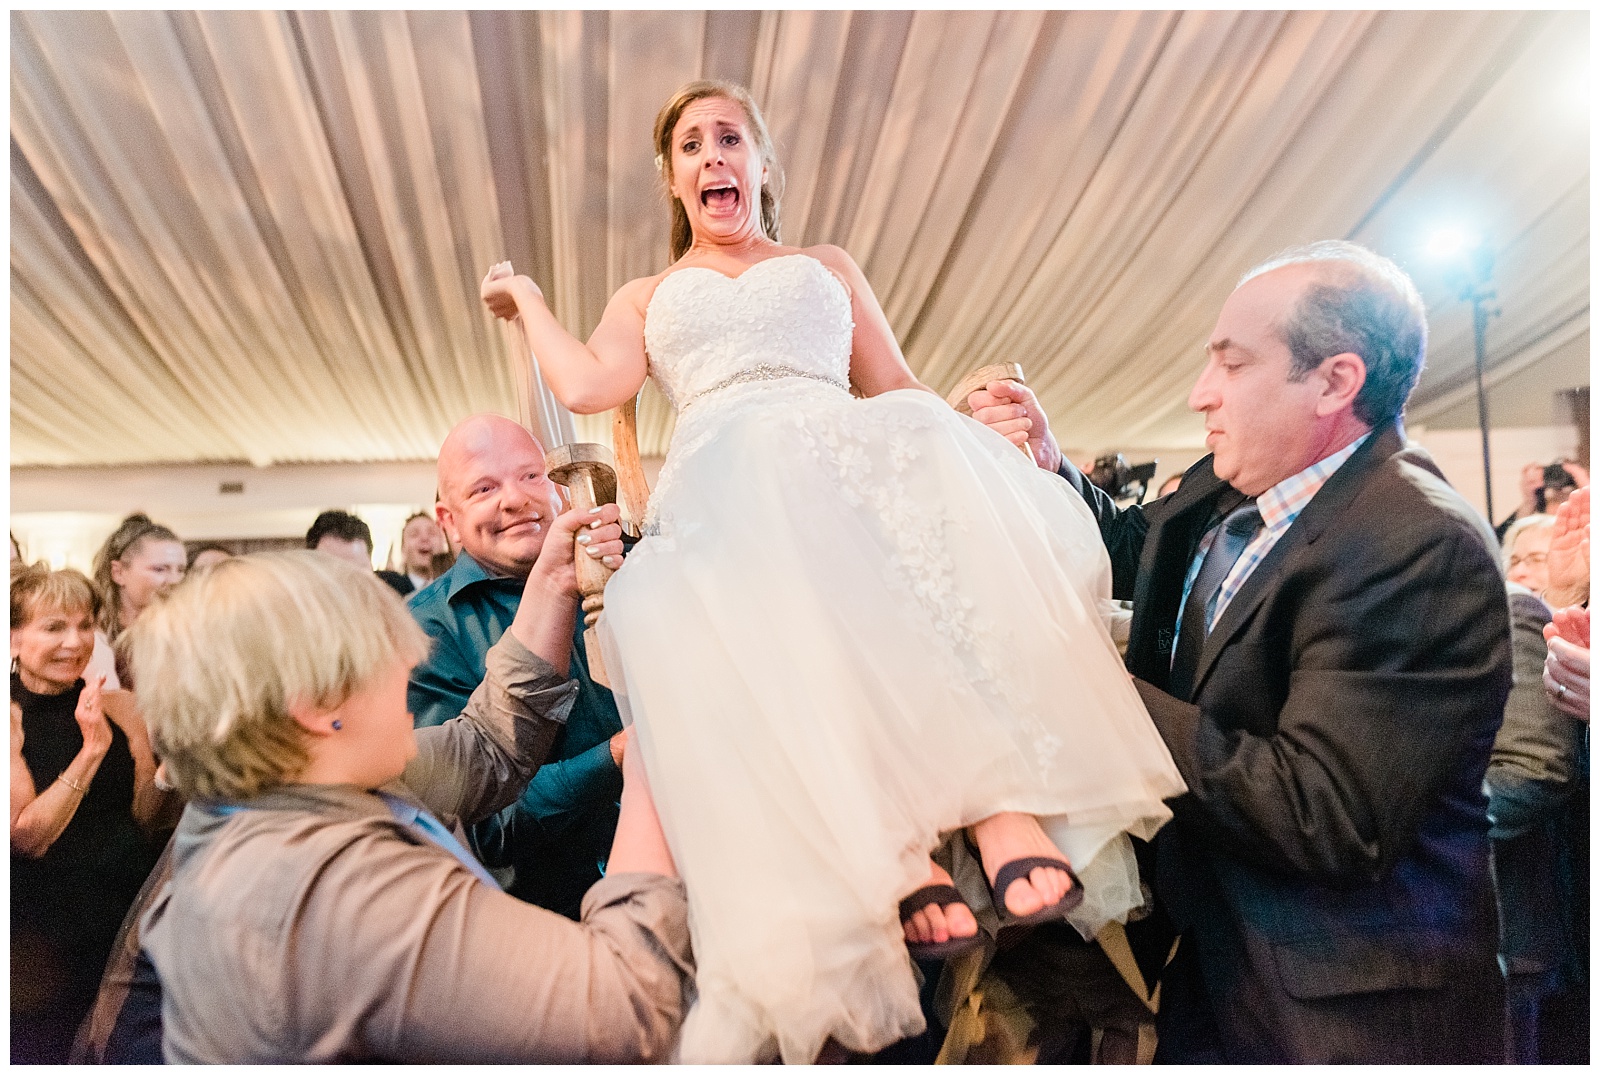 Bride screams while lifted on a chair for the hora dance.